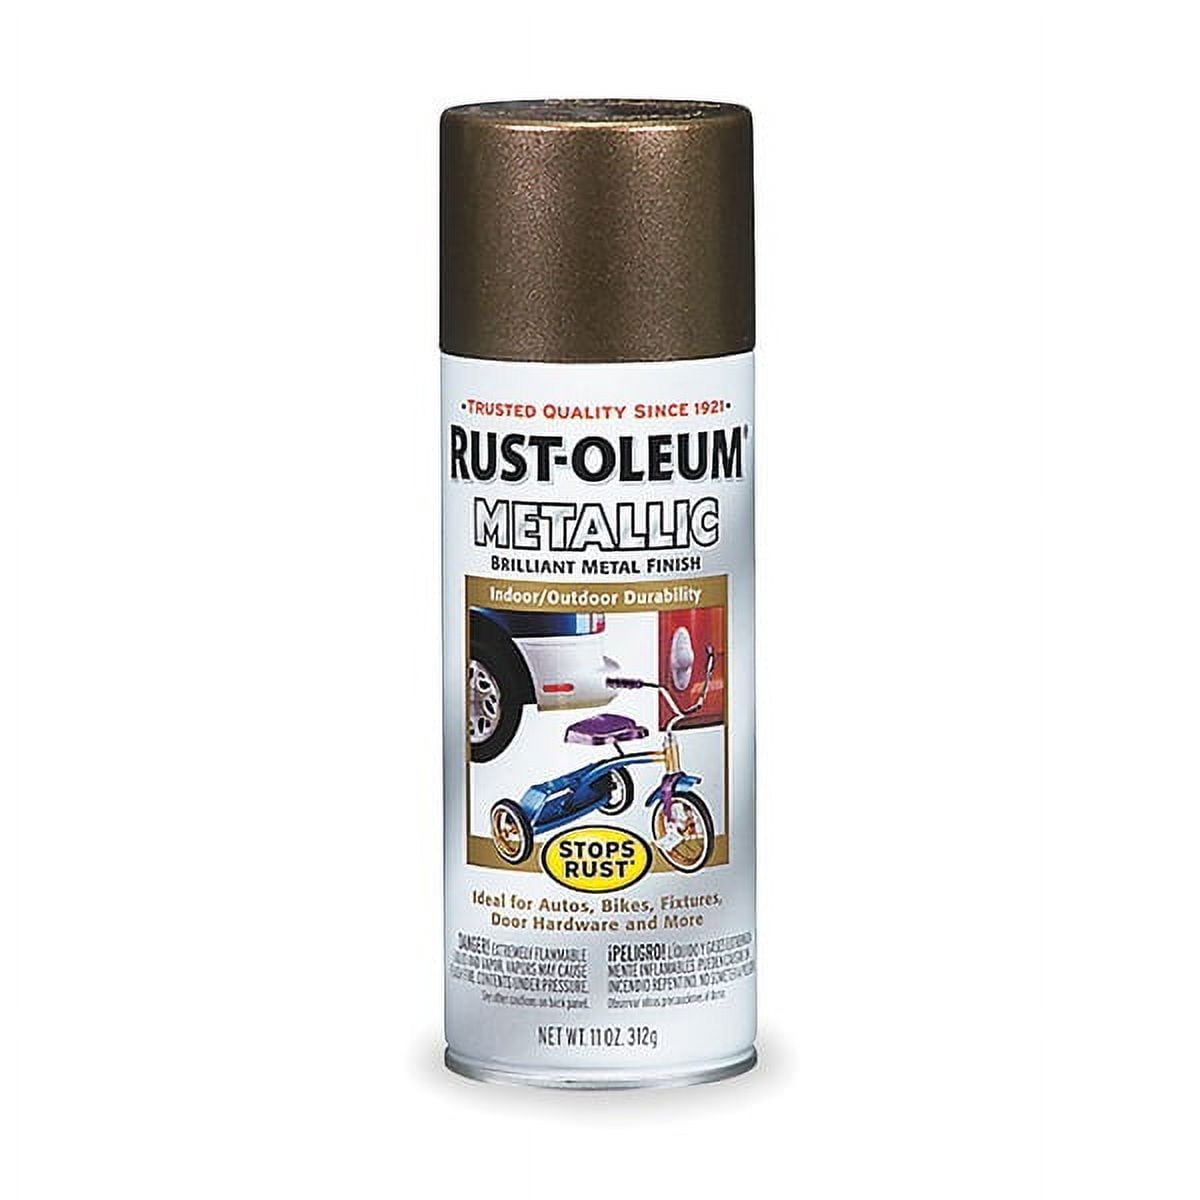 Home Hardware 3171 Antique Brass Precisely Matched For Paint and Spray Paint